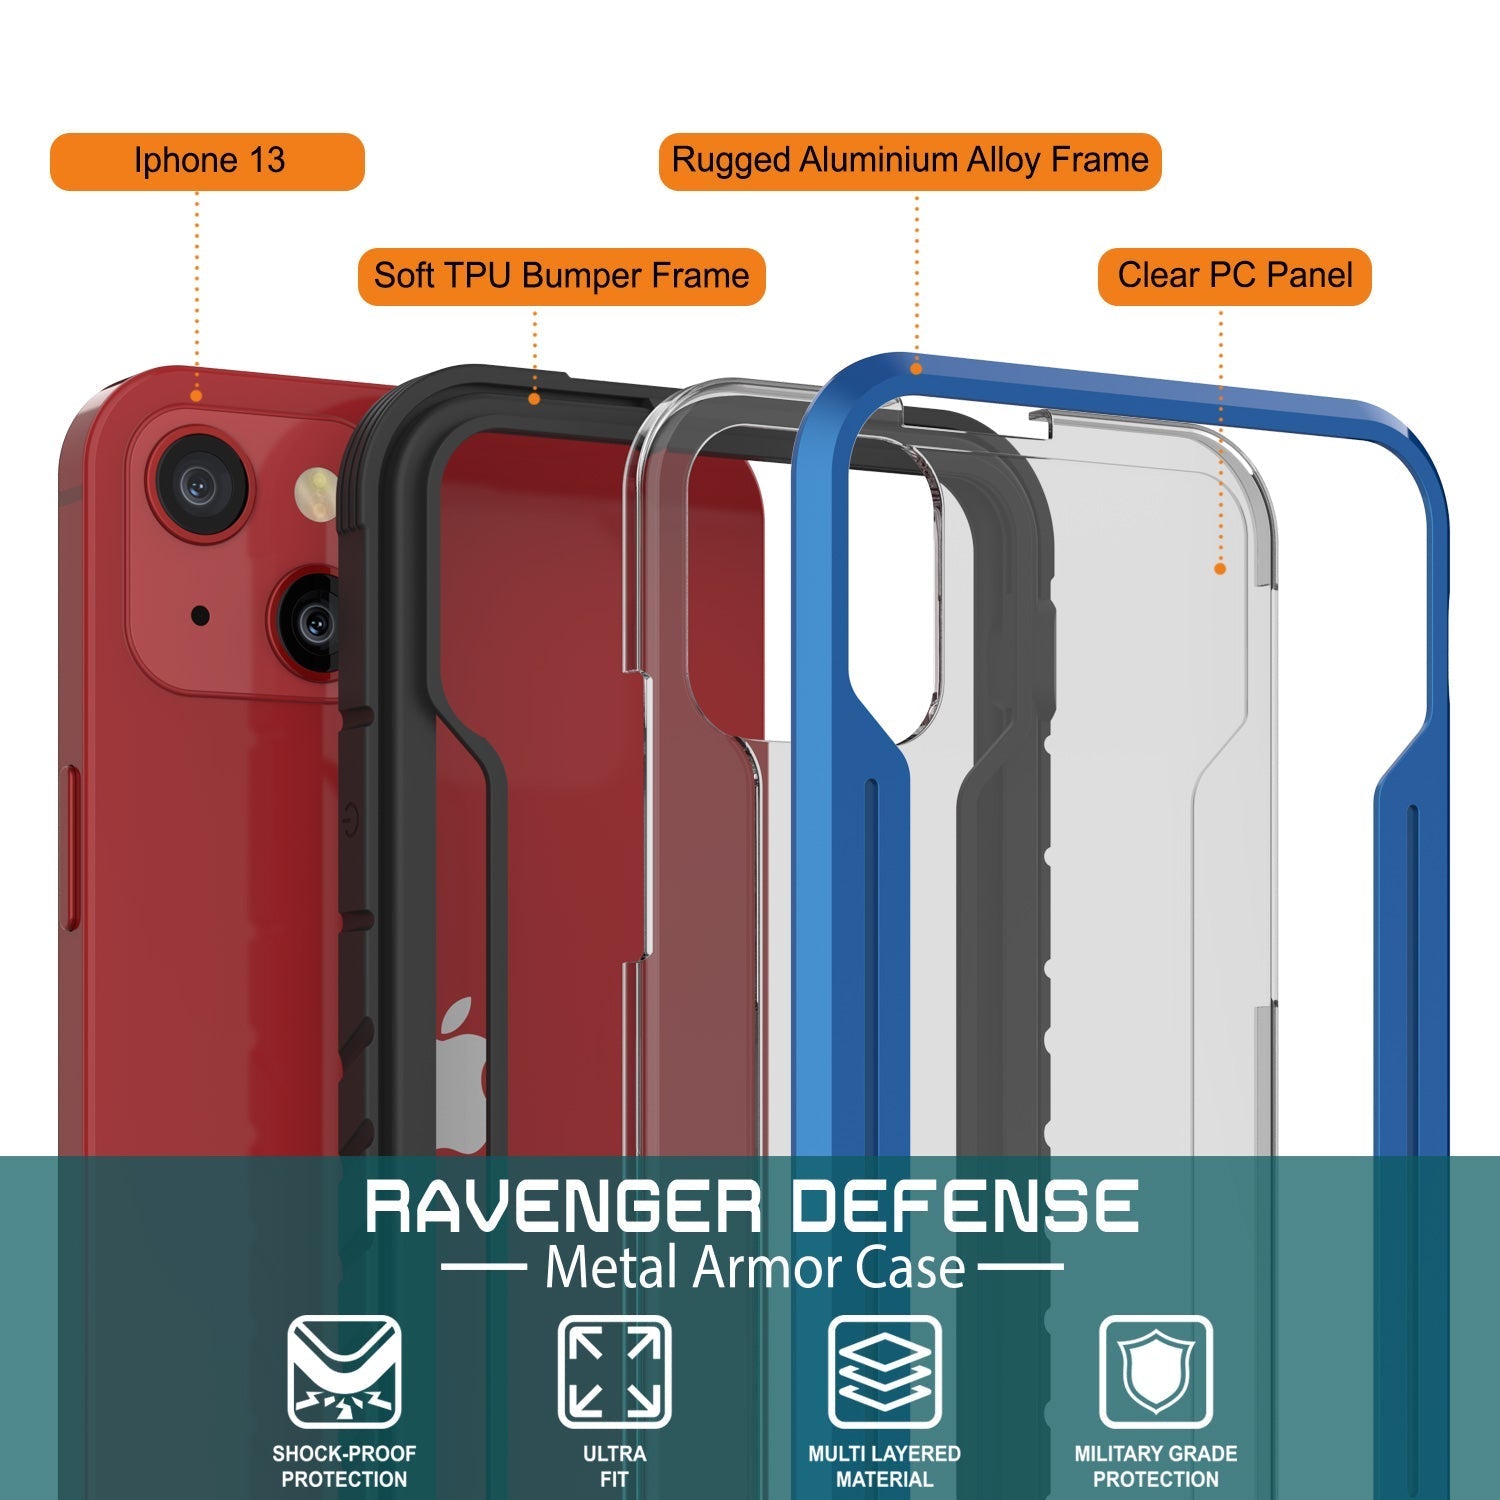 Punkcase iPhone 14 Ravenger MAG Defense Case Protective Military Grade Multilayer Cover [Navy Blue]